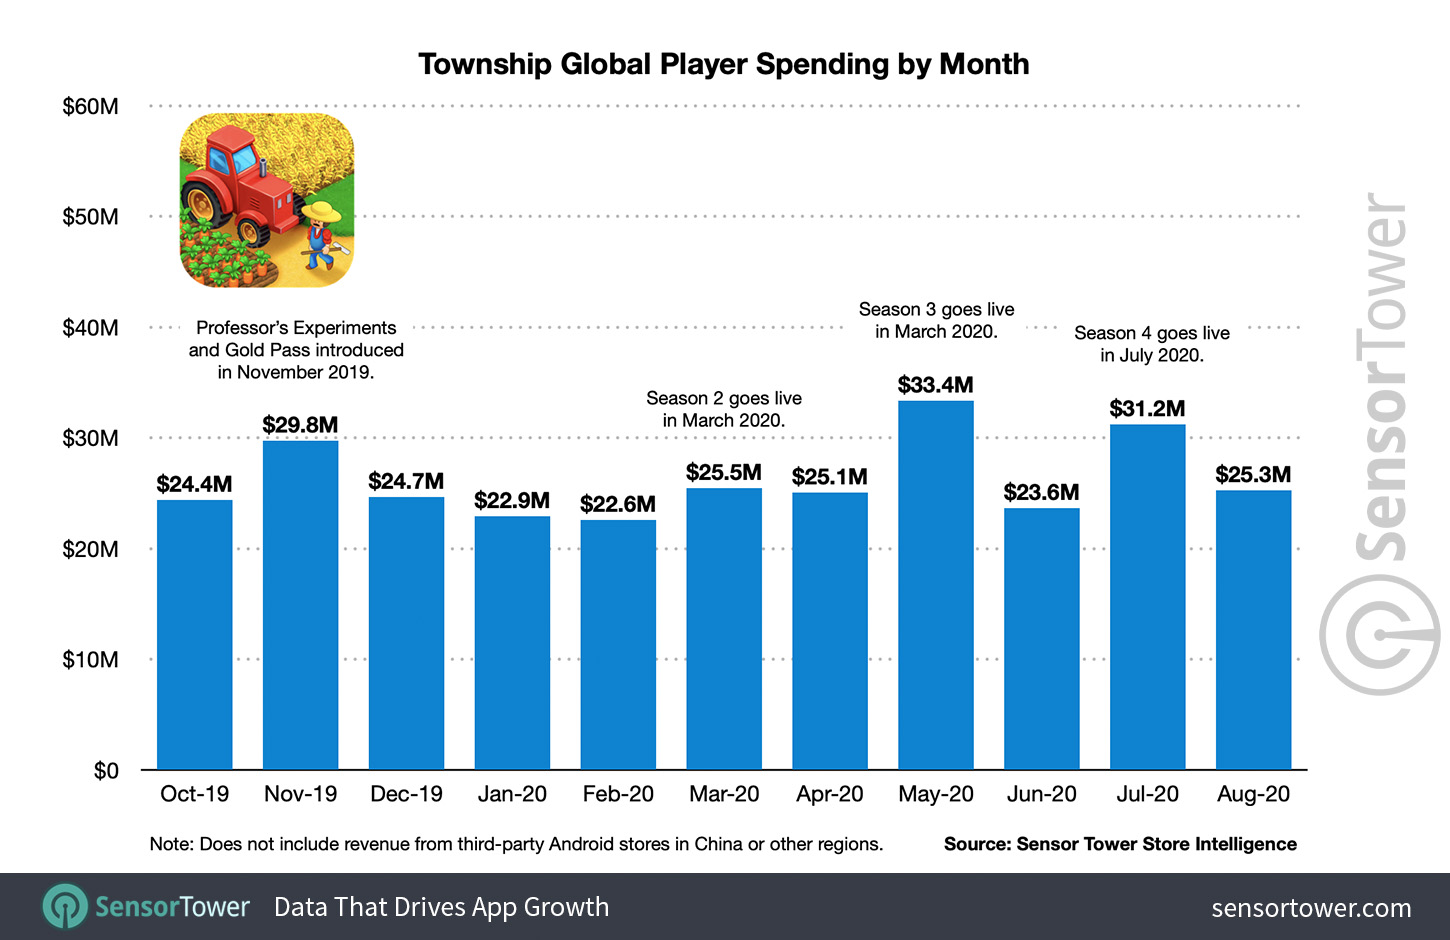 Township Global Player Spending by Month